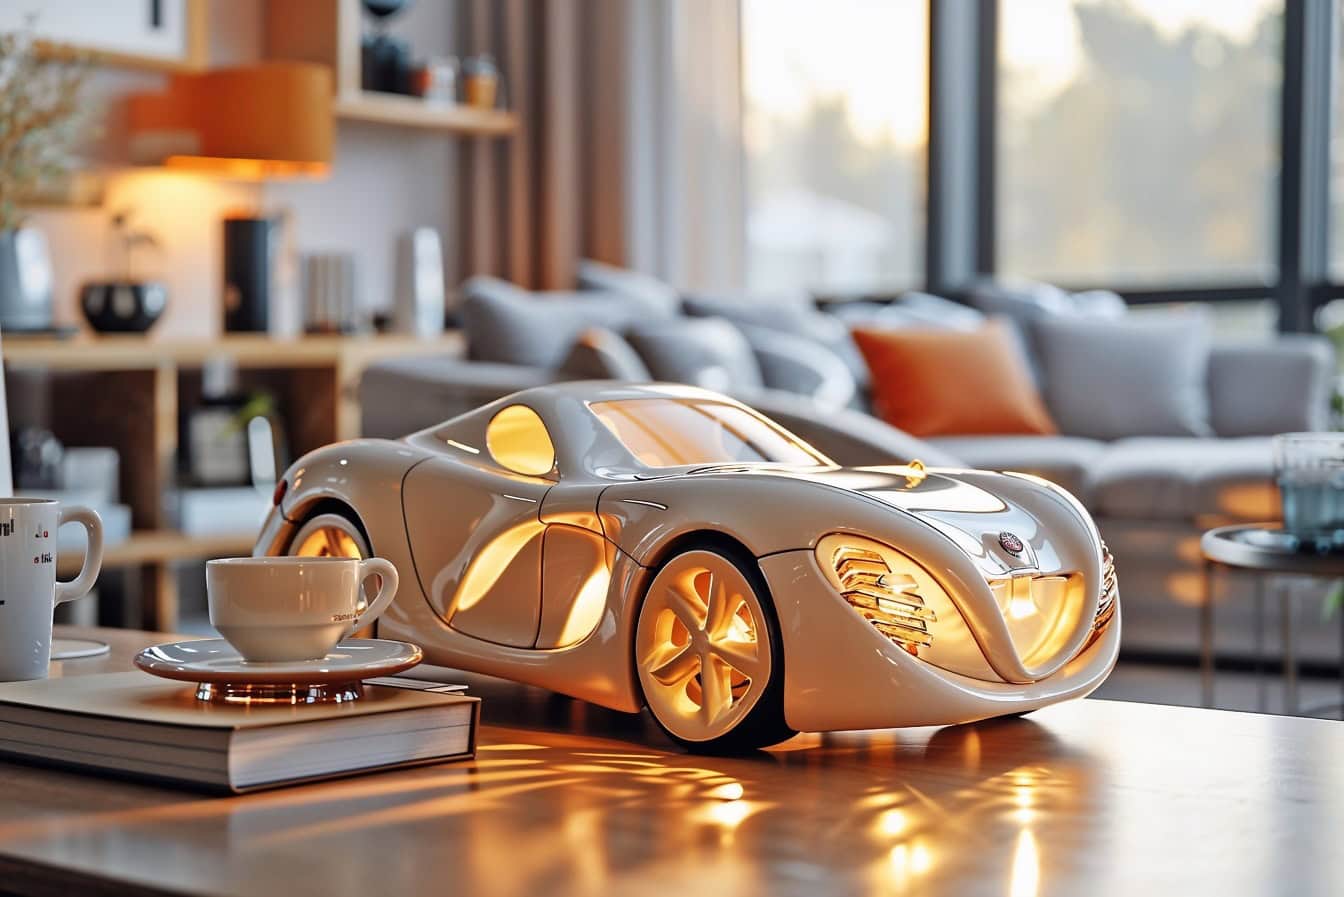 Luminous toy-lamp in the form of a modern sports car on the living room table